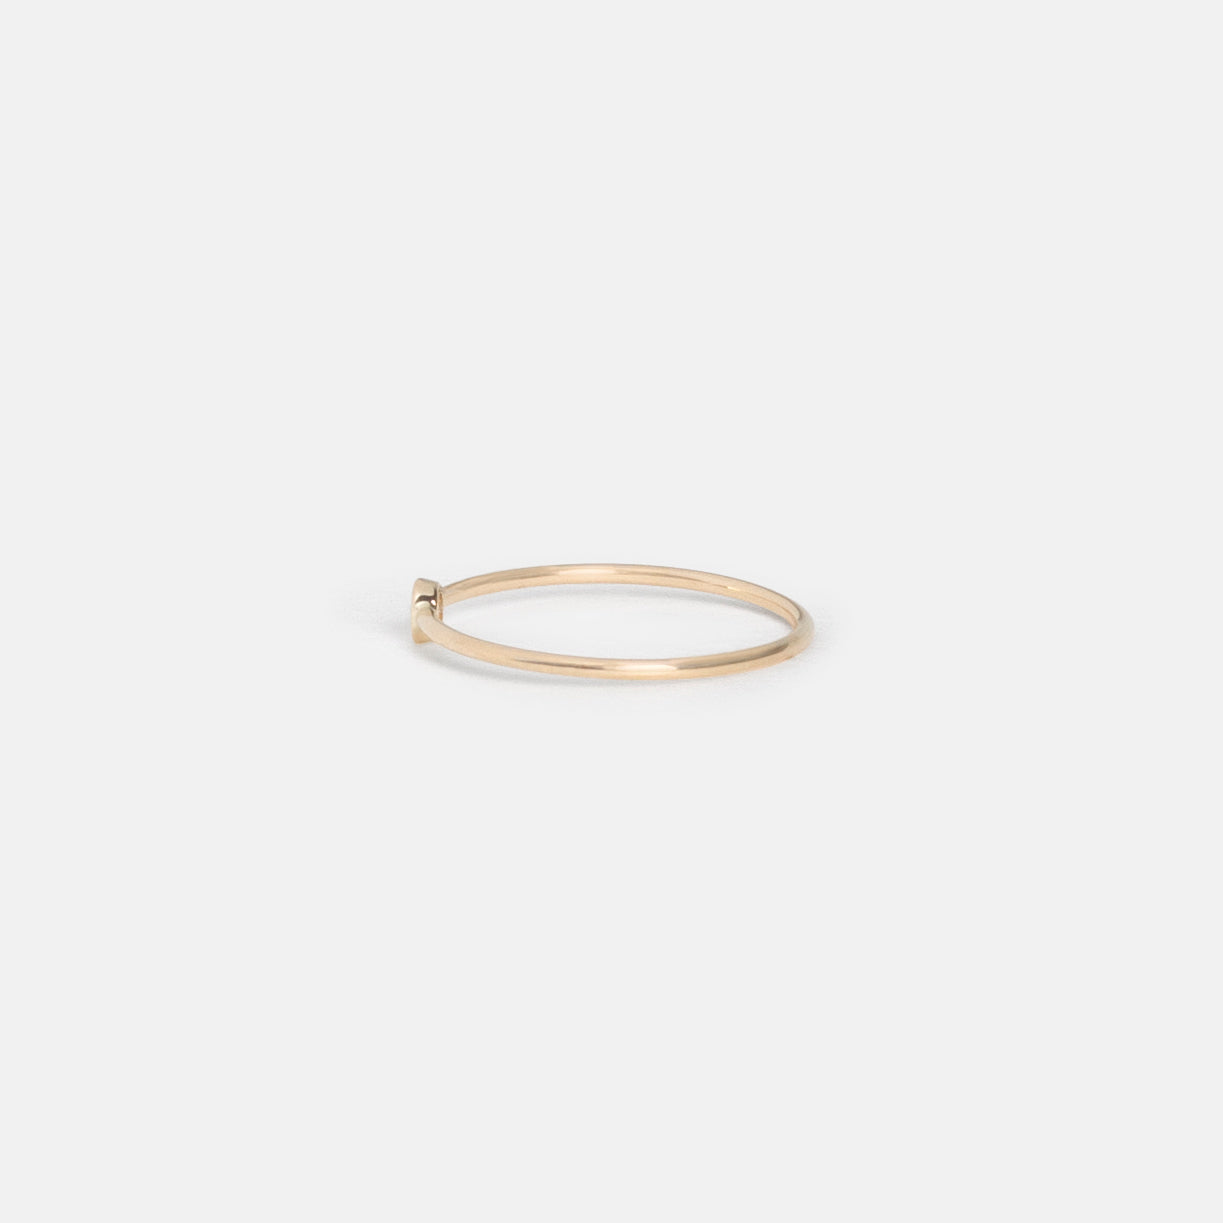 Unique Large Kaya Ring in 14k Gold set with White Diamond by SHW Fine Jewelry in NYC